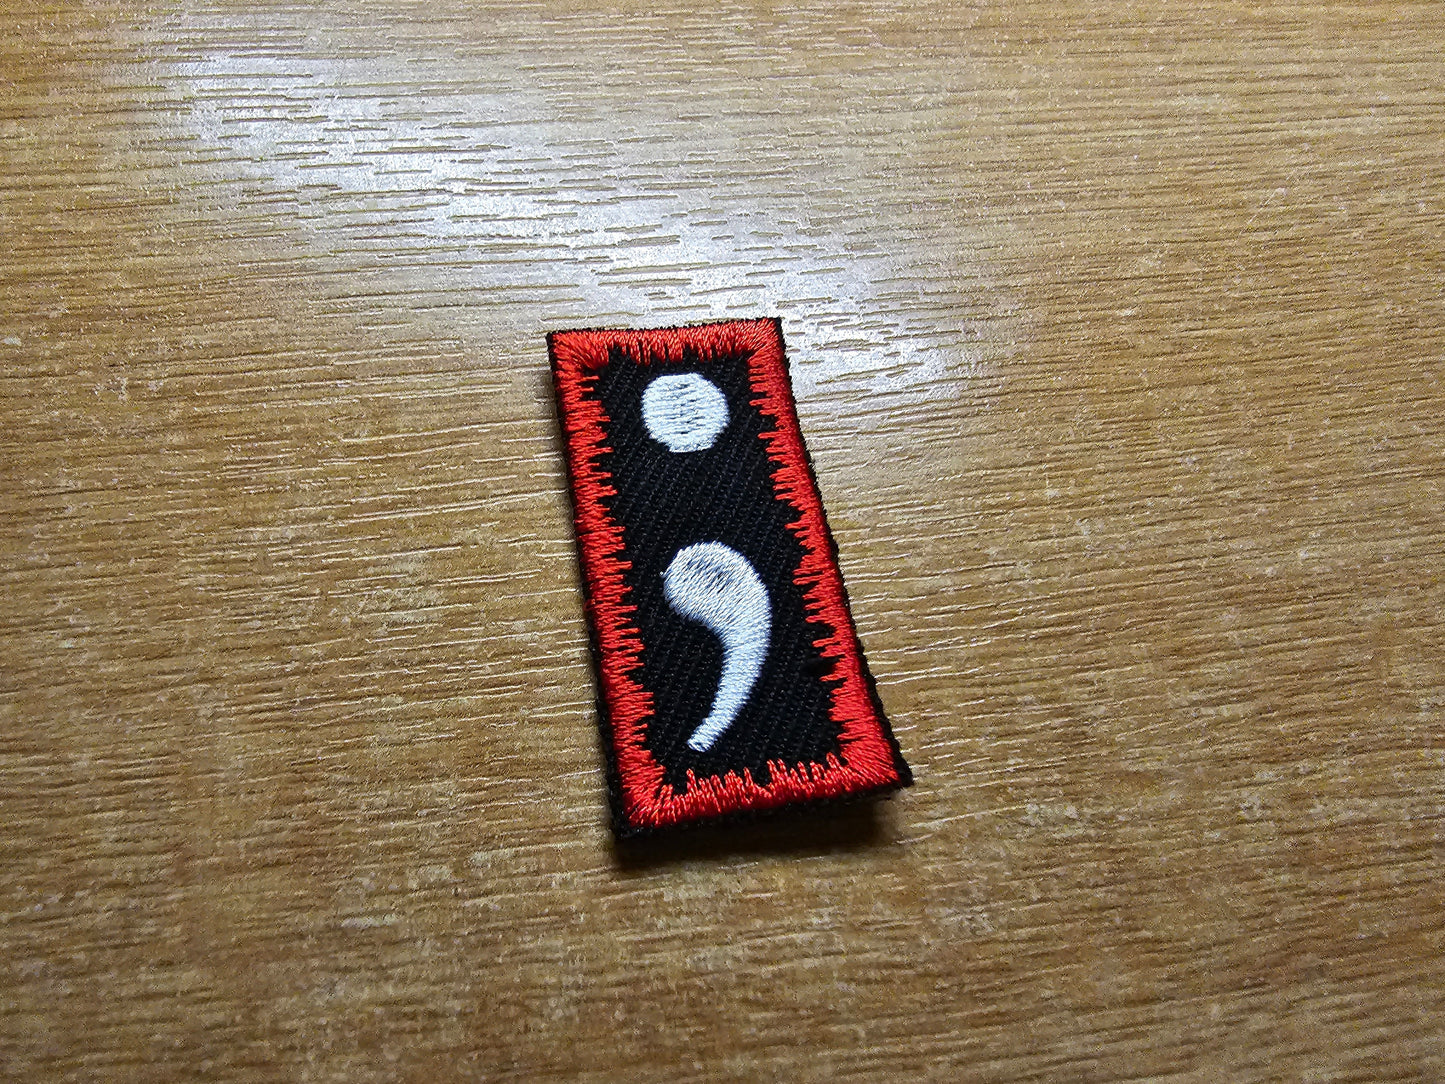 Semi Colon Patch TINY Gap filler for mental health awareness and solidarity